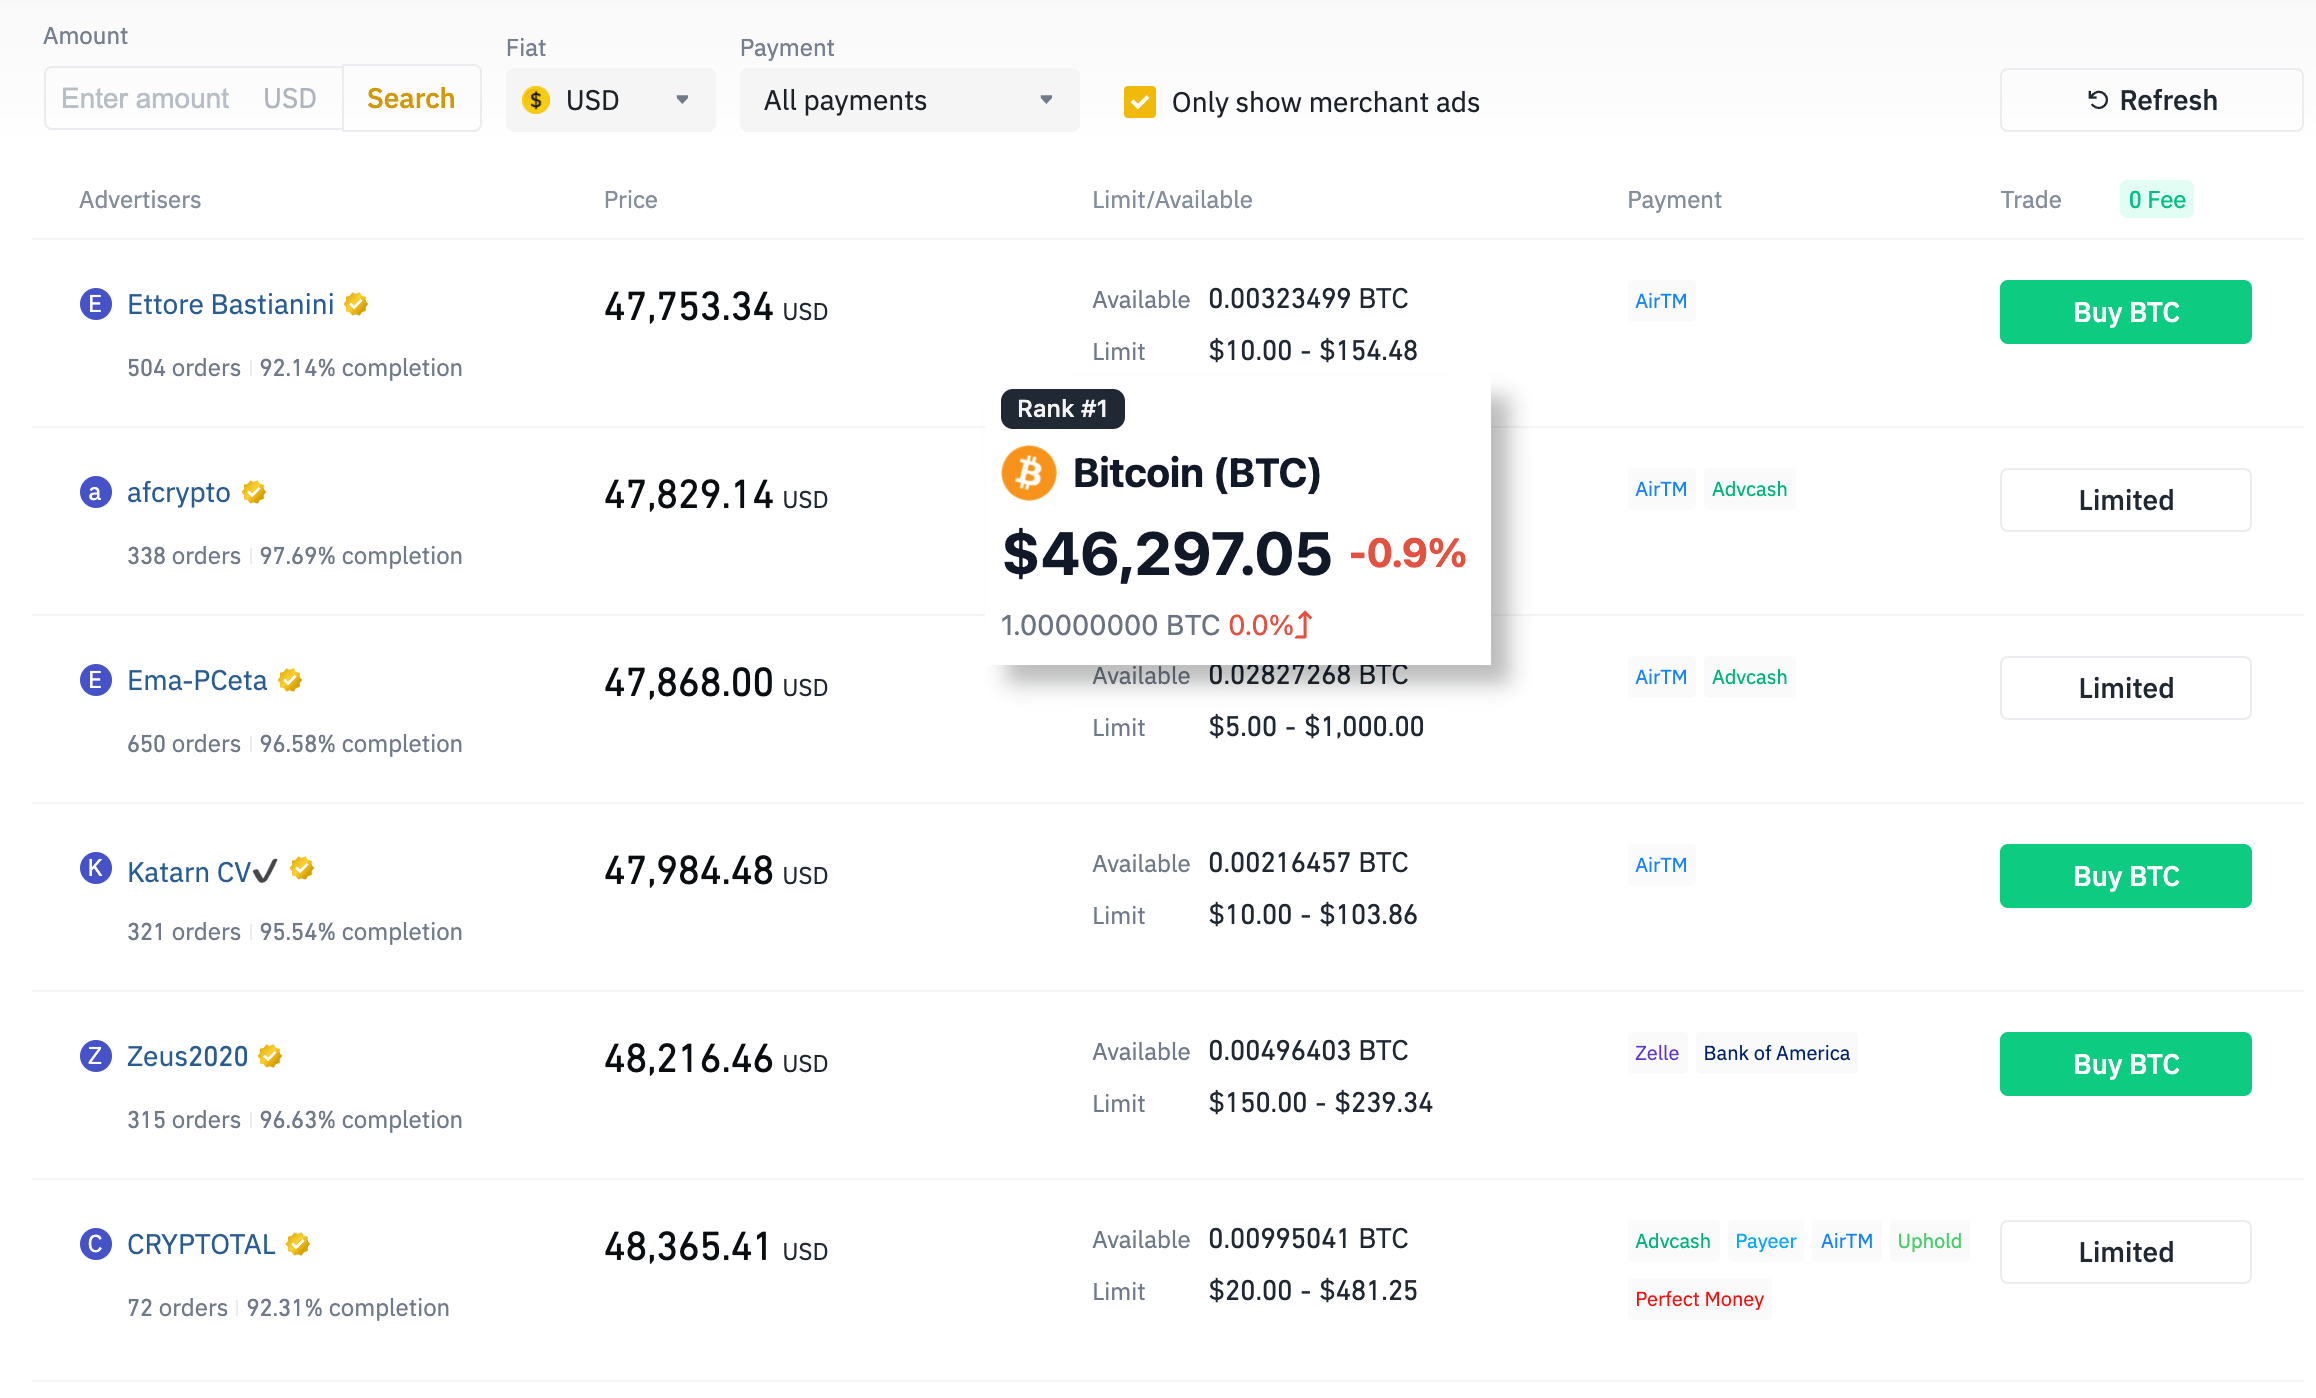 P2P trading view on Binance. You can see a list of BTC positions that are for sale. The prices per Bitcoin range from $47'753 to $48'365. An overlay shows the current real Bitcoin price, which is $46'297.